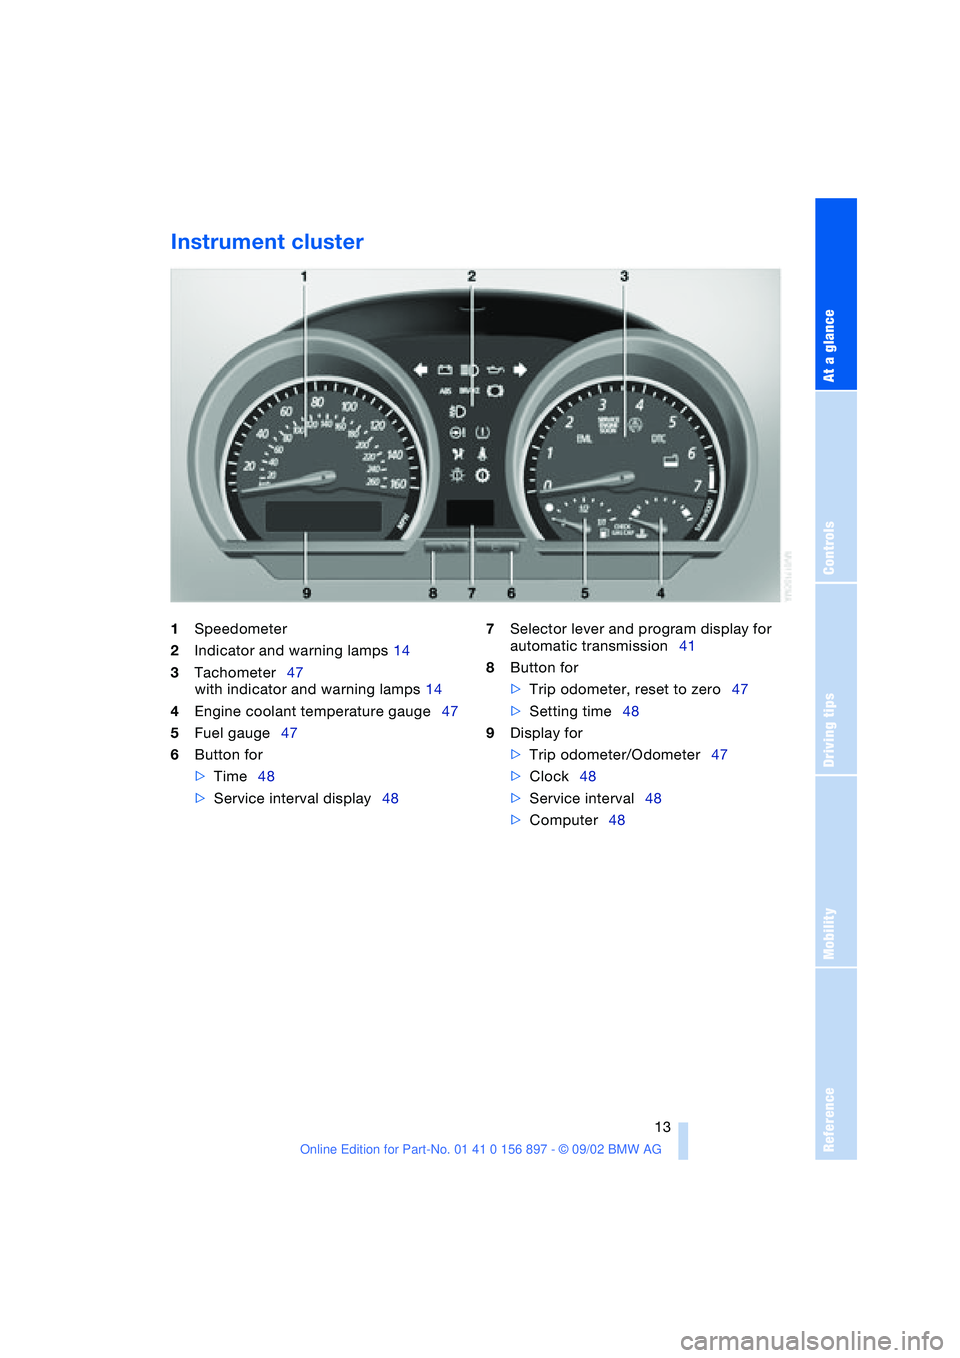 BMW 3.0i ROADSTER 2003 User Guide At a glance
Controls
Driving tips
Mobility
Reference
 13
Instrument cluster
1Speedometer
2Indicator and warning lamps 14
3Tachometer47
with indicator and warning lamps 14
4Engine coolant temperature g